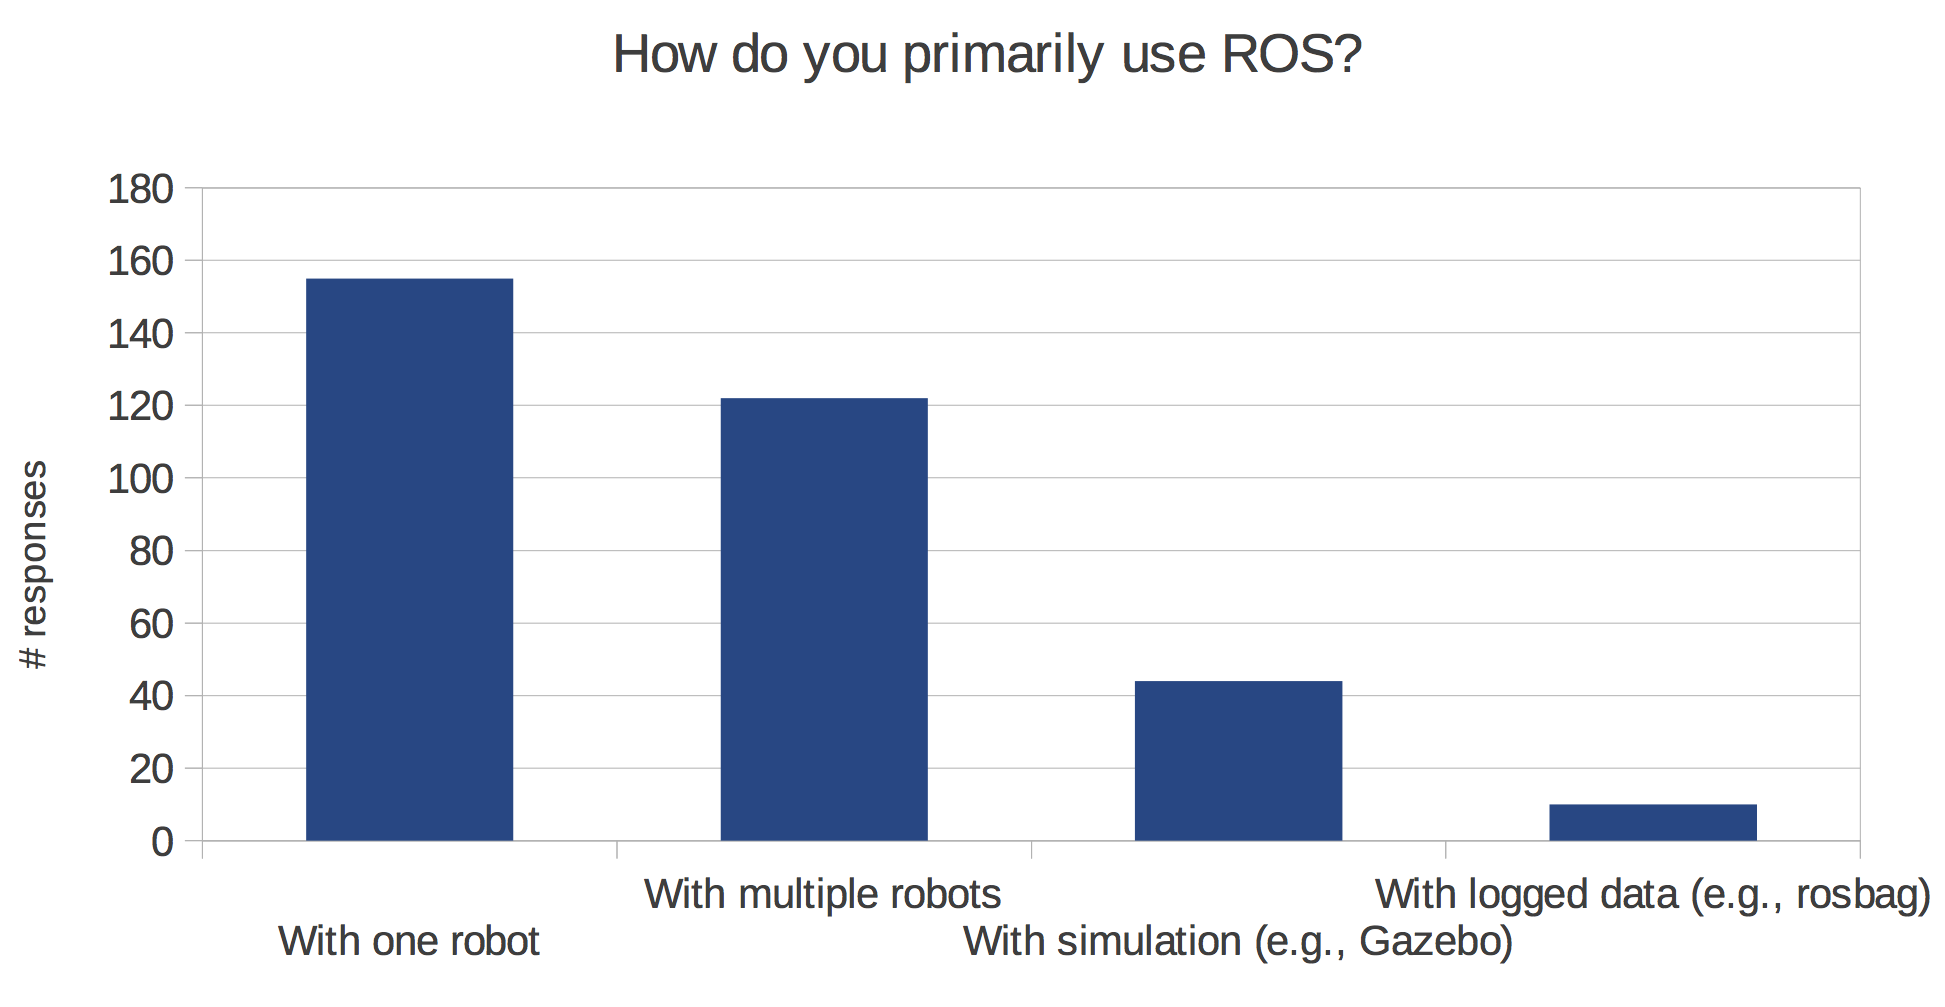 http://www.ros.org/news/2014/04/01/how-use-ros.png